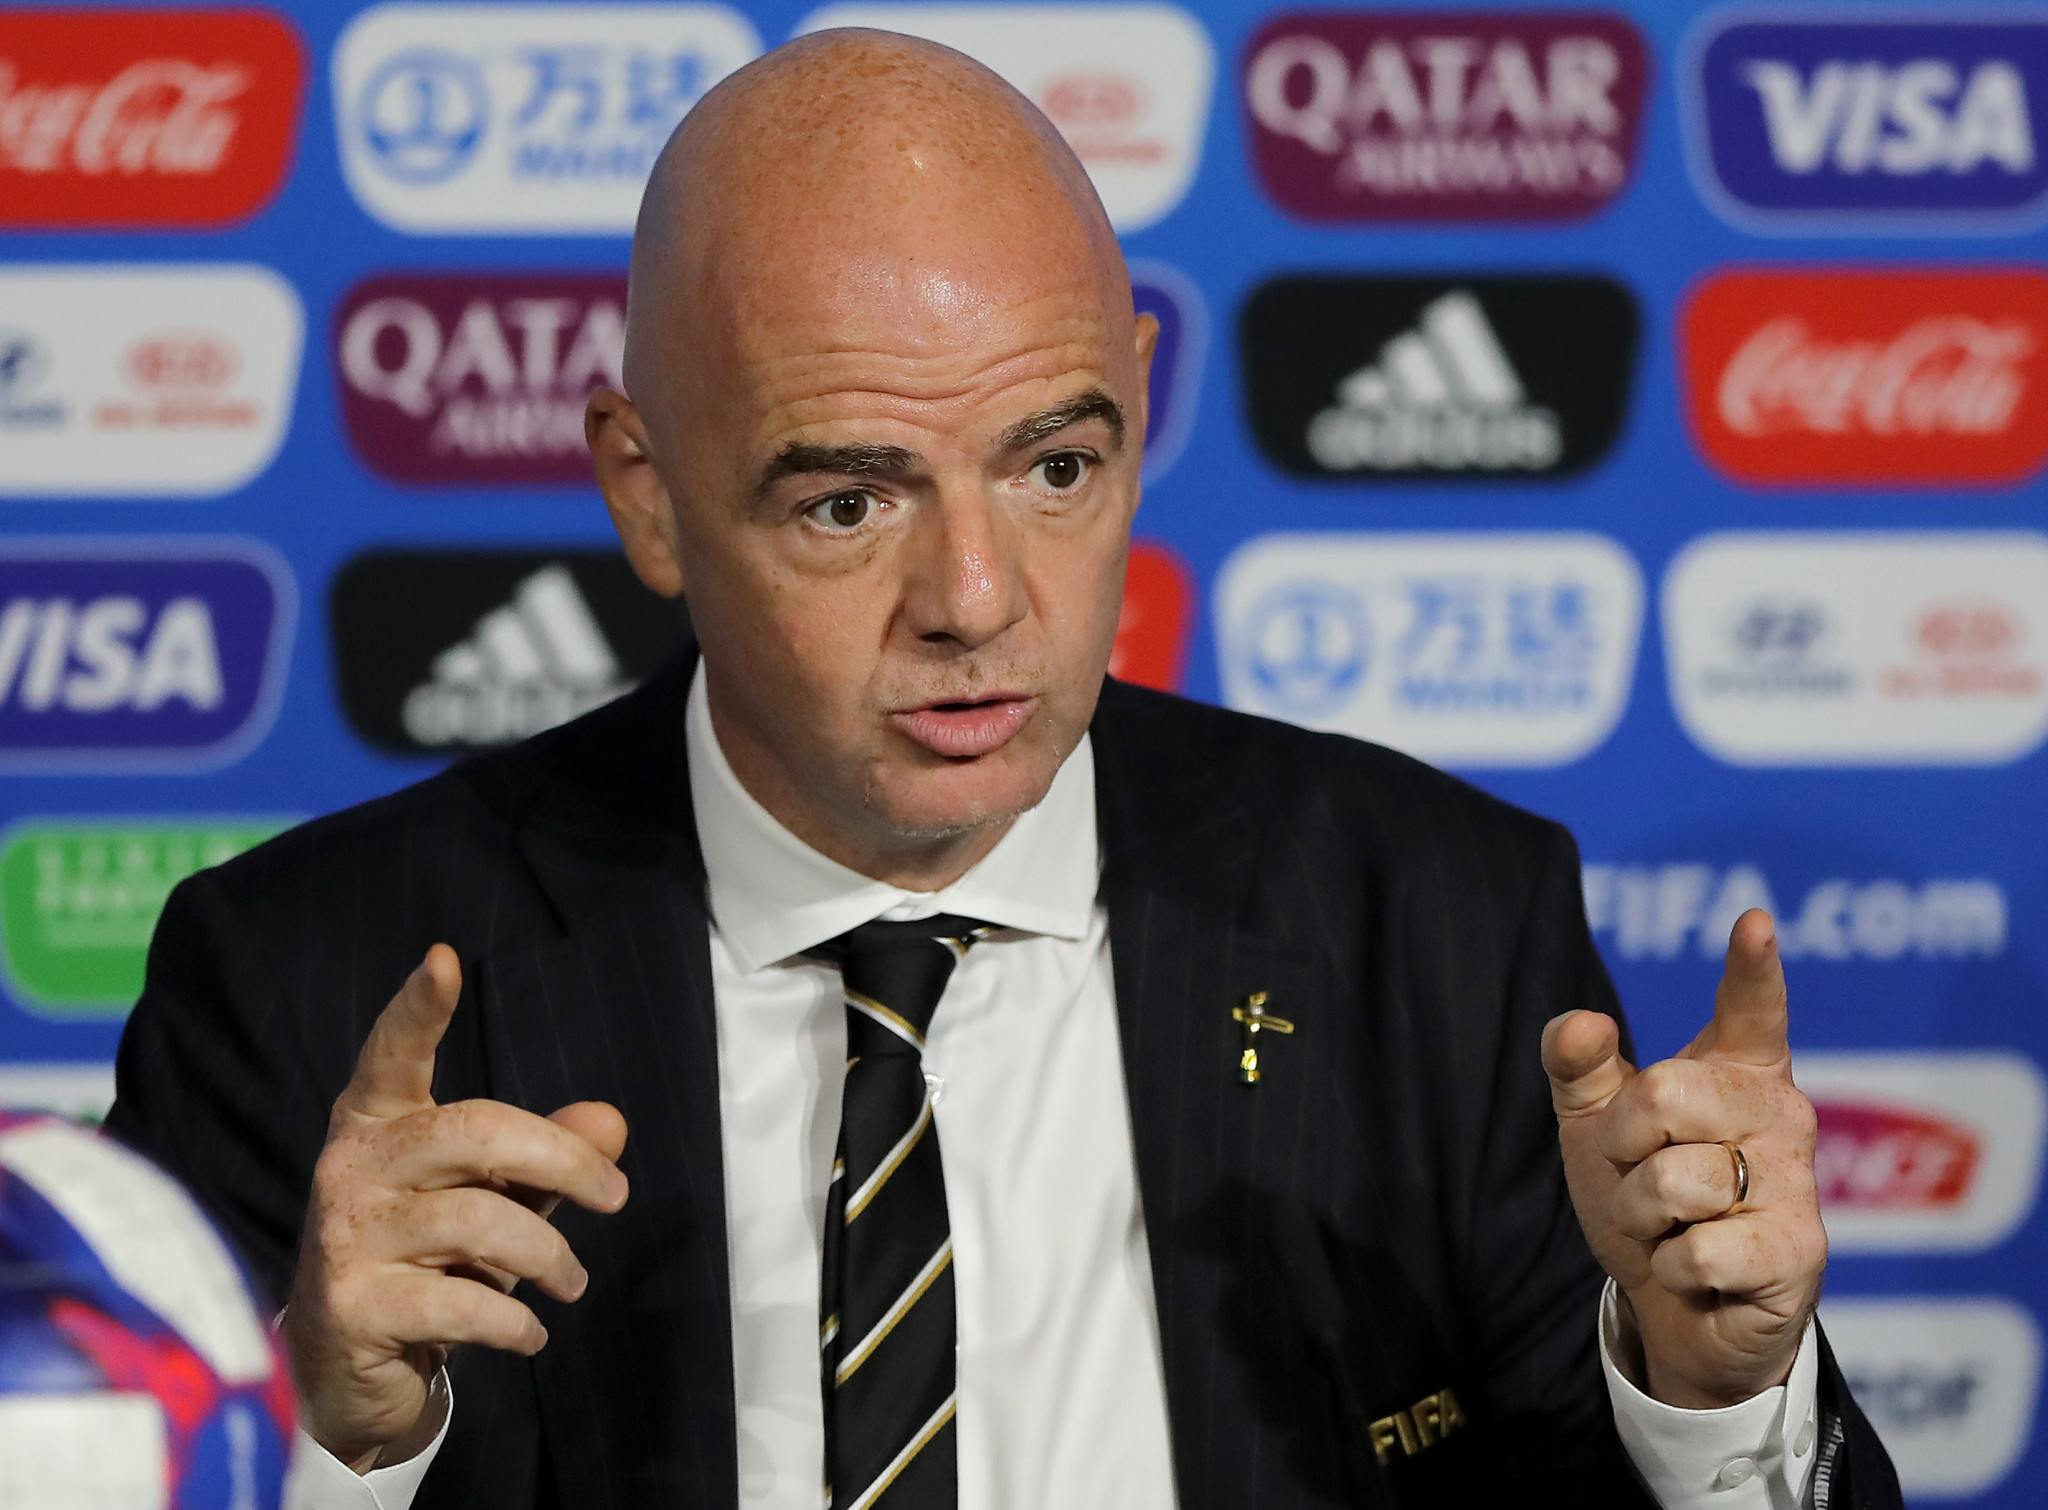 FIFA President Infantino says no decision made for 2022 World Cup qualifiers